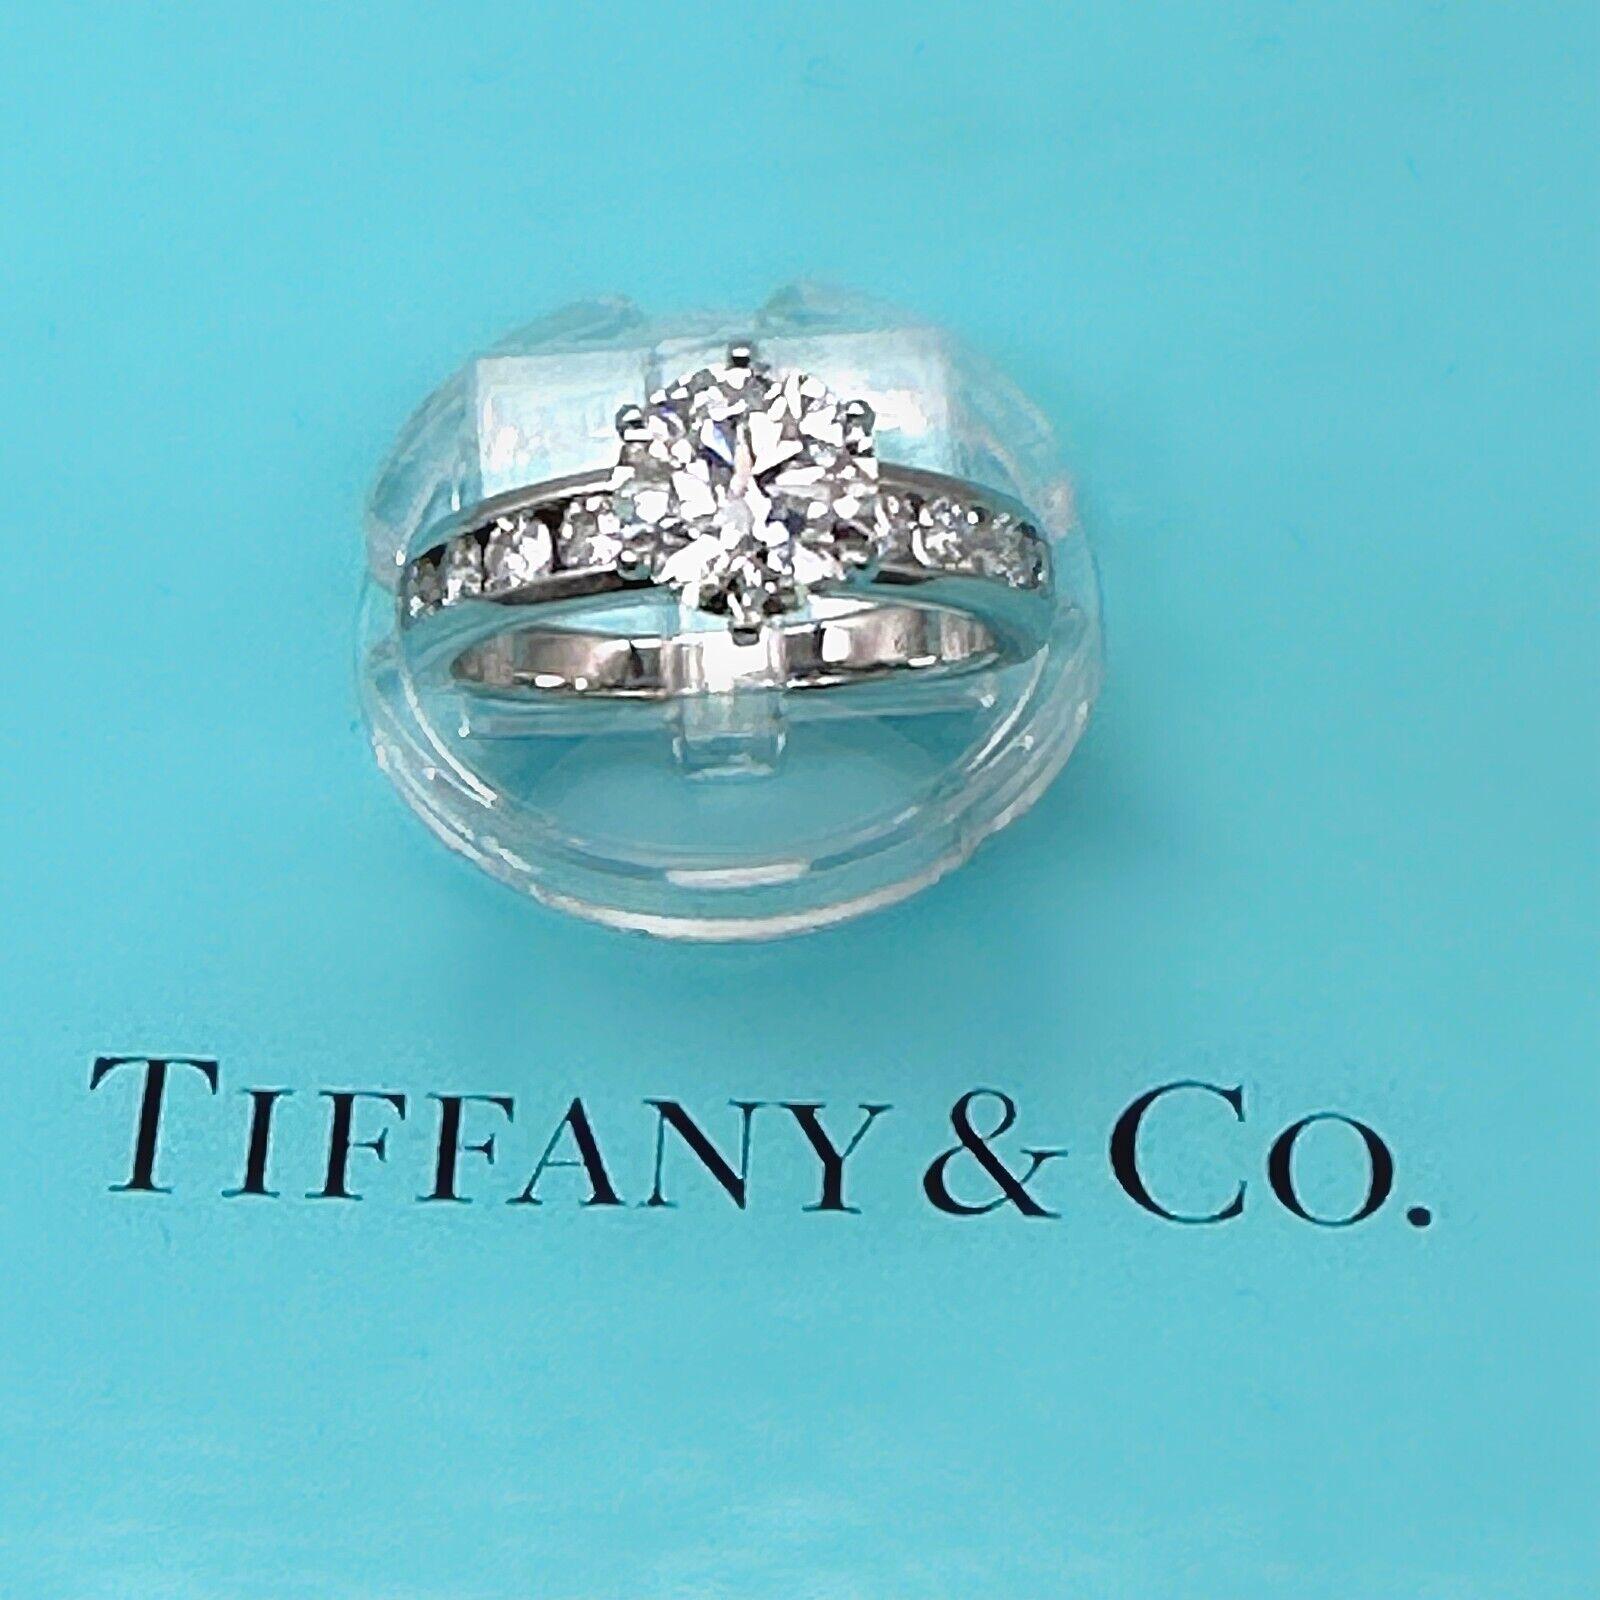 Tiffany & Co. 2.75 tcw Tiffany Setting Channel-Set Diamond Band Eng Ring Plat For Sale 5